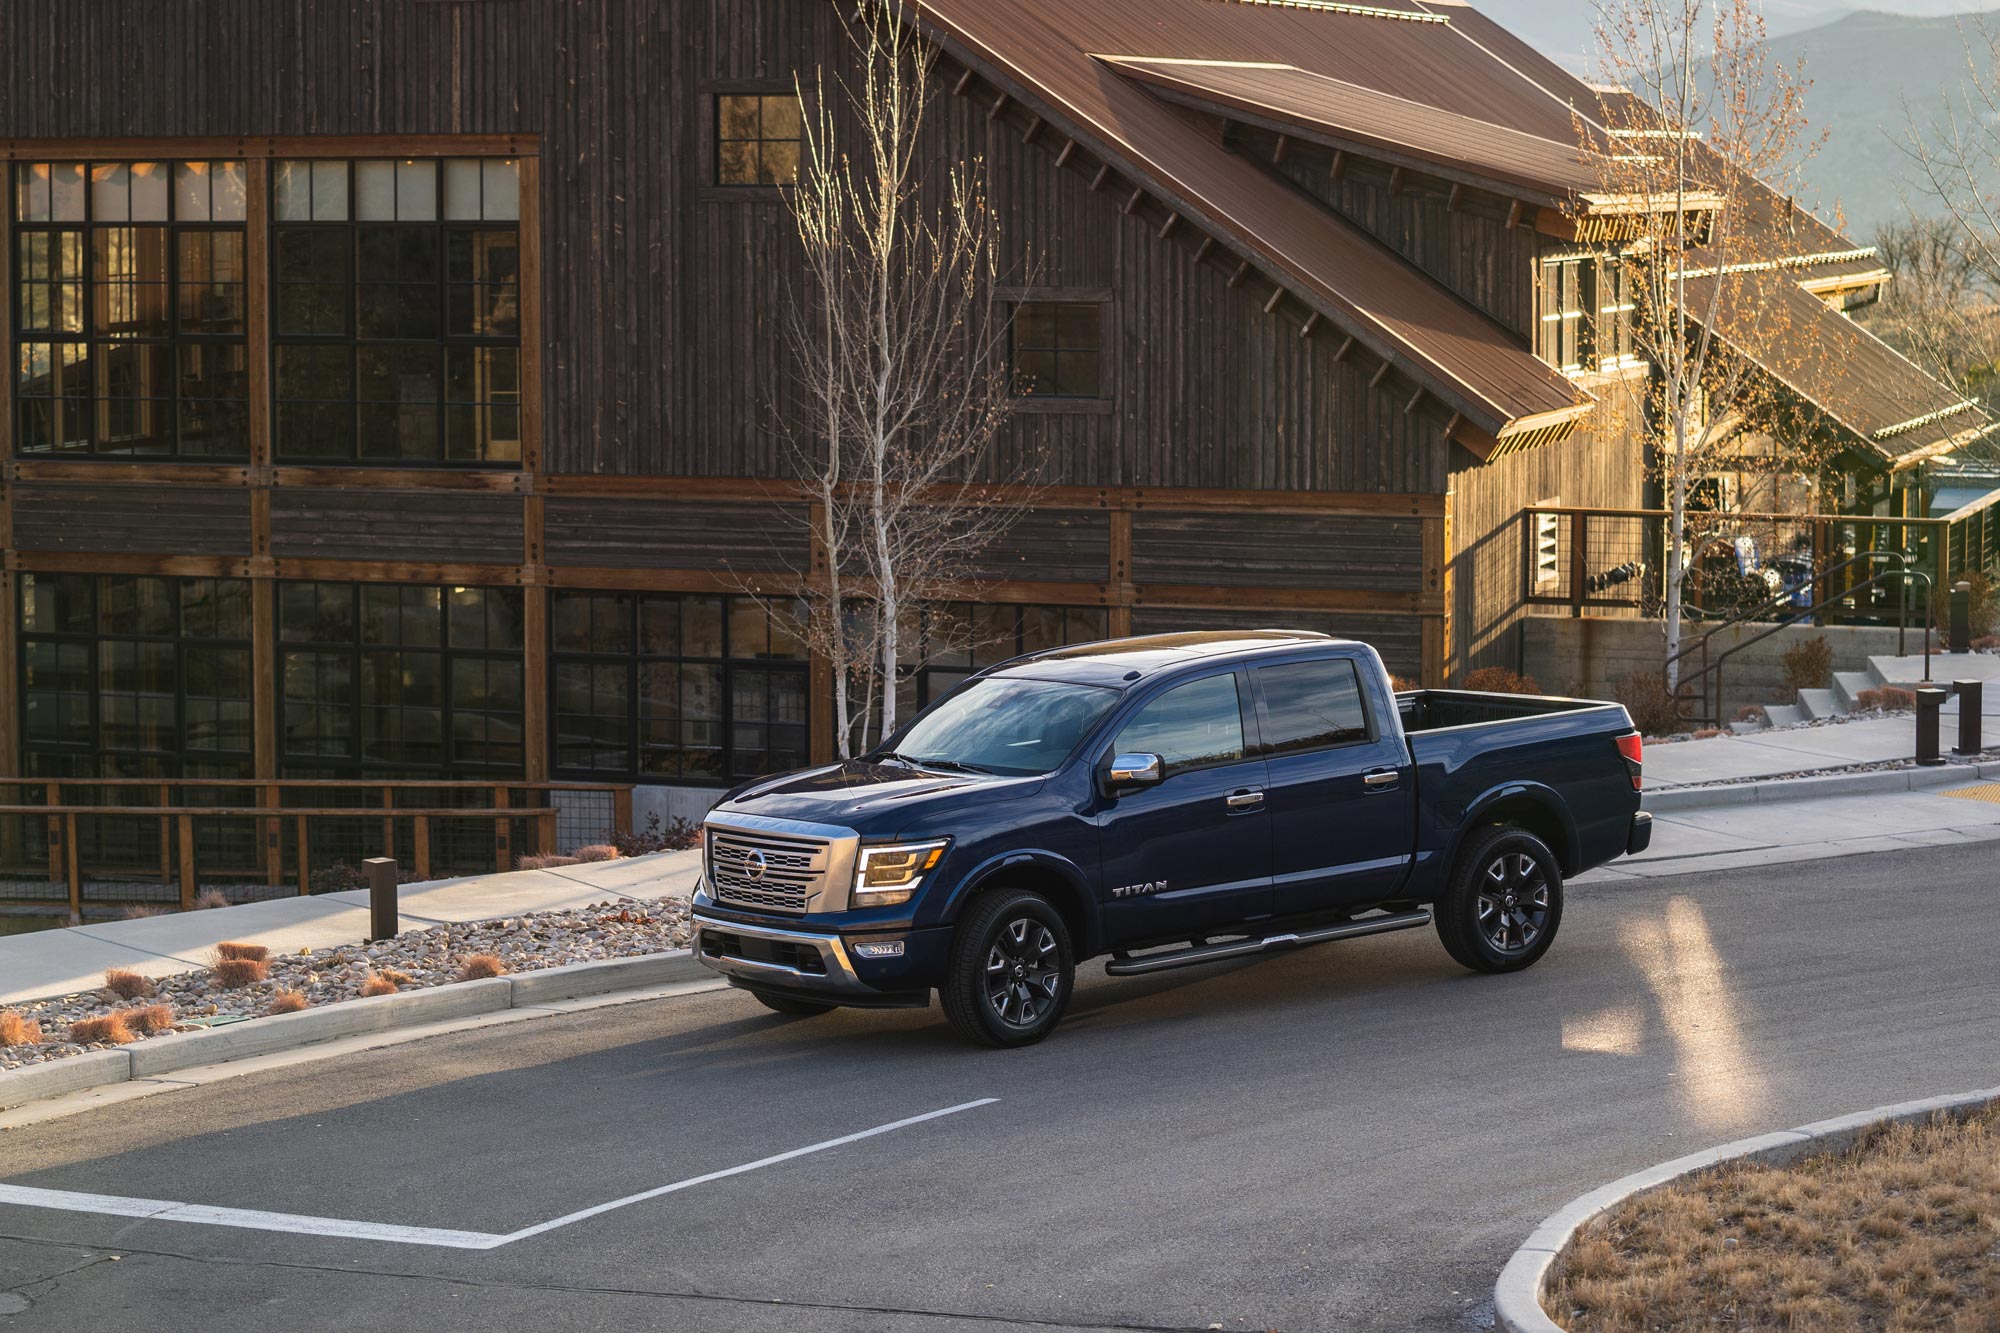 Blue 2023 Nissan Titan sits parked on a road by a large wood sided building.